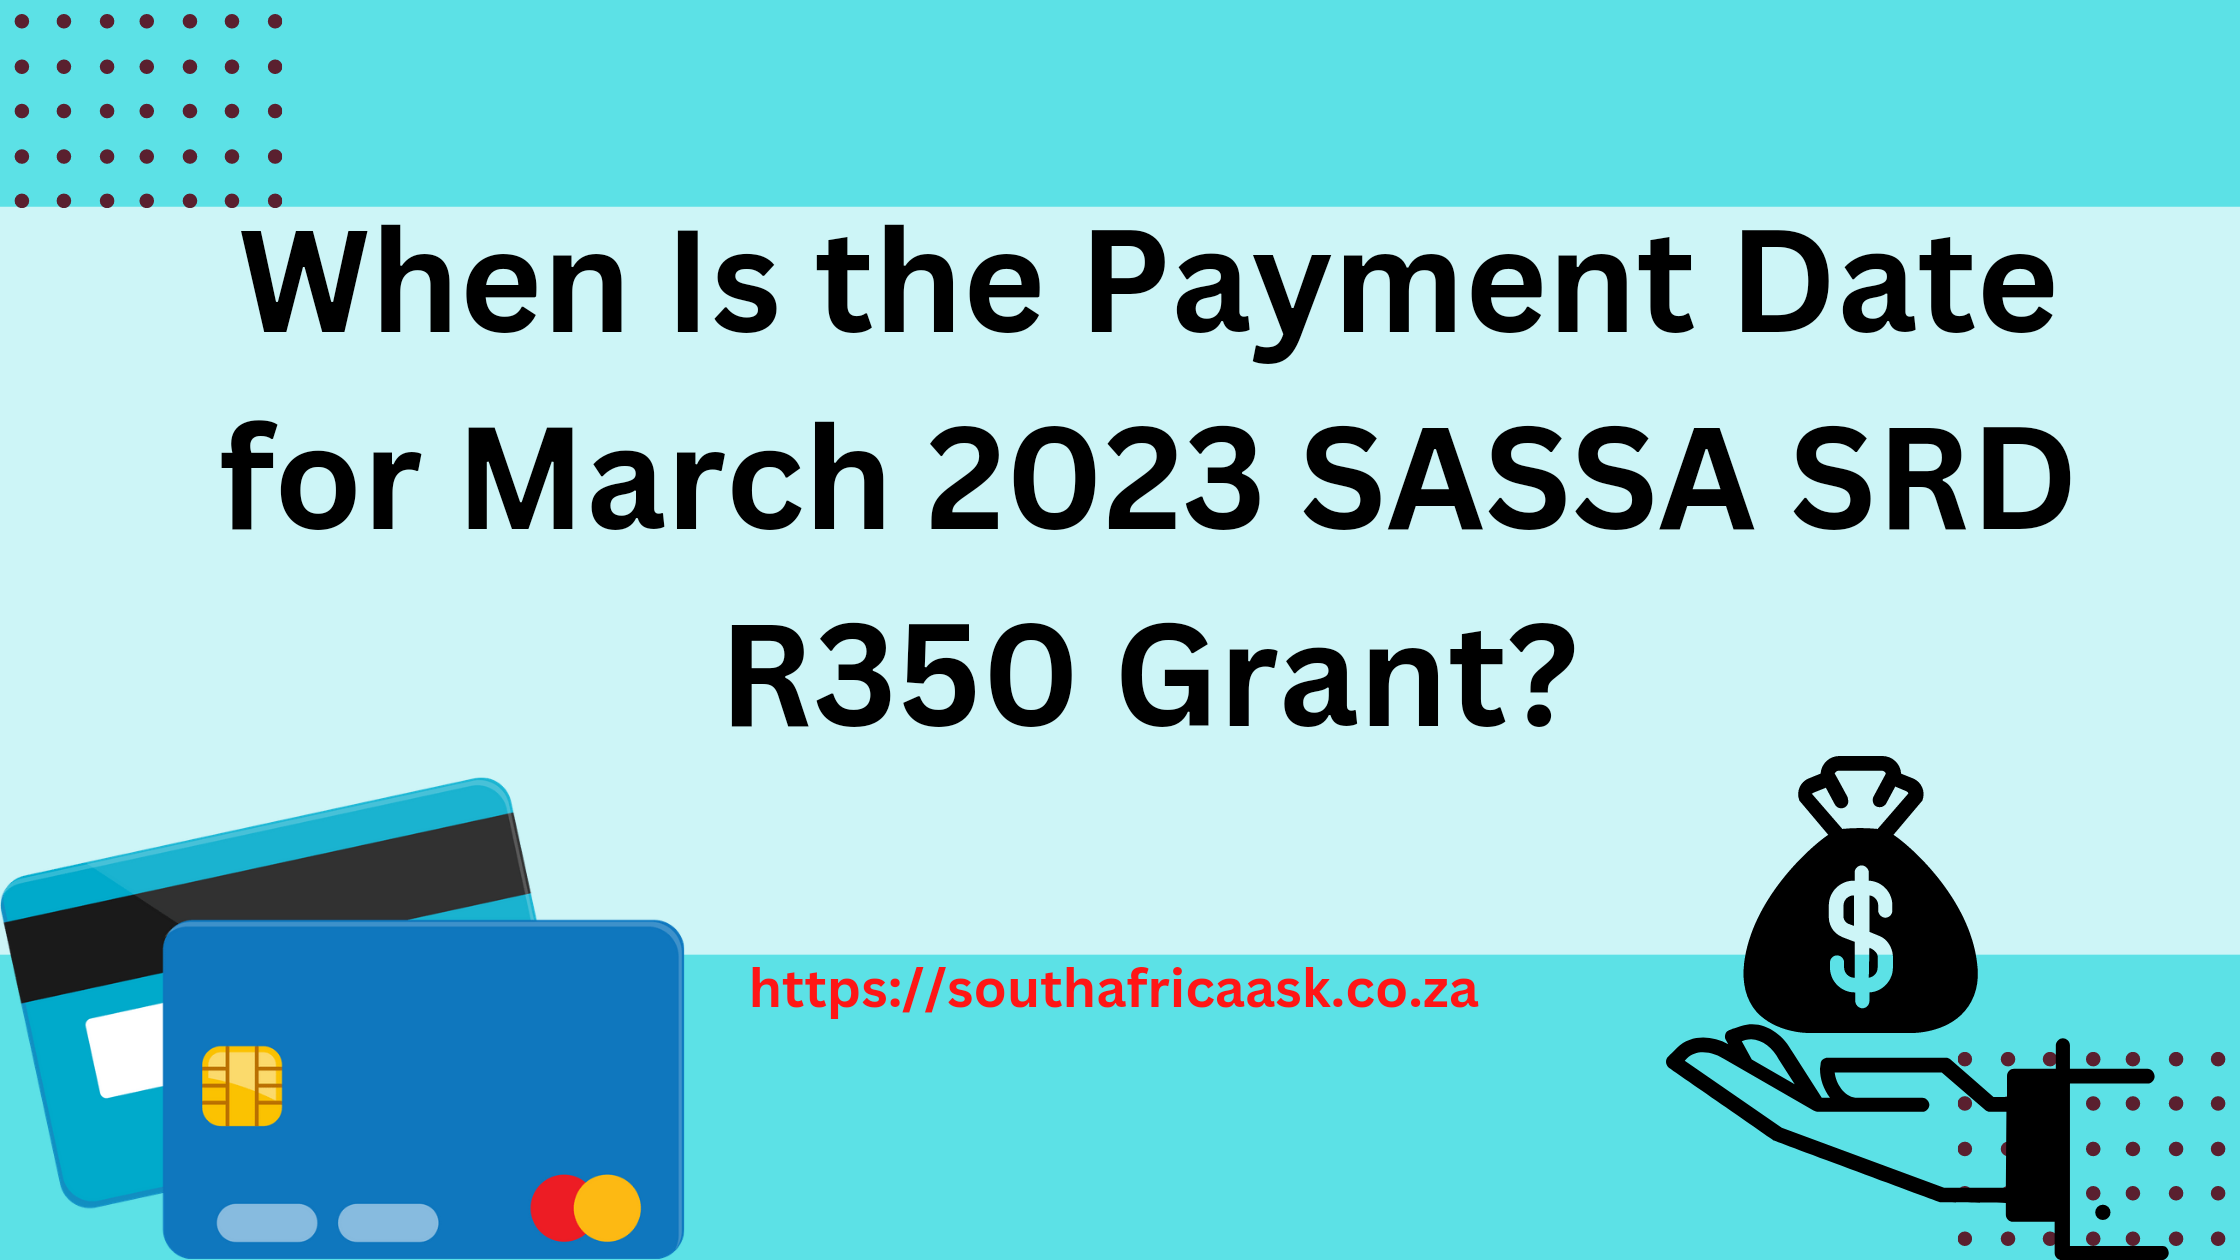 When Is the Payment Date for March 2023 SASSA SRD R350 Grant?